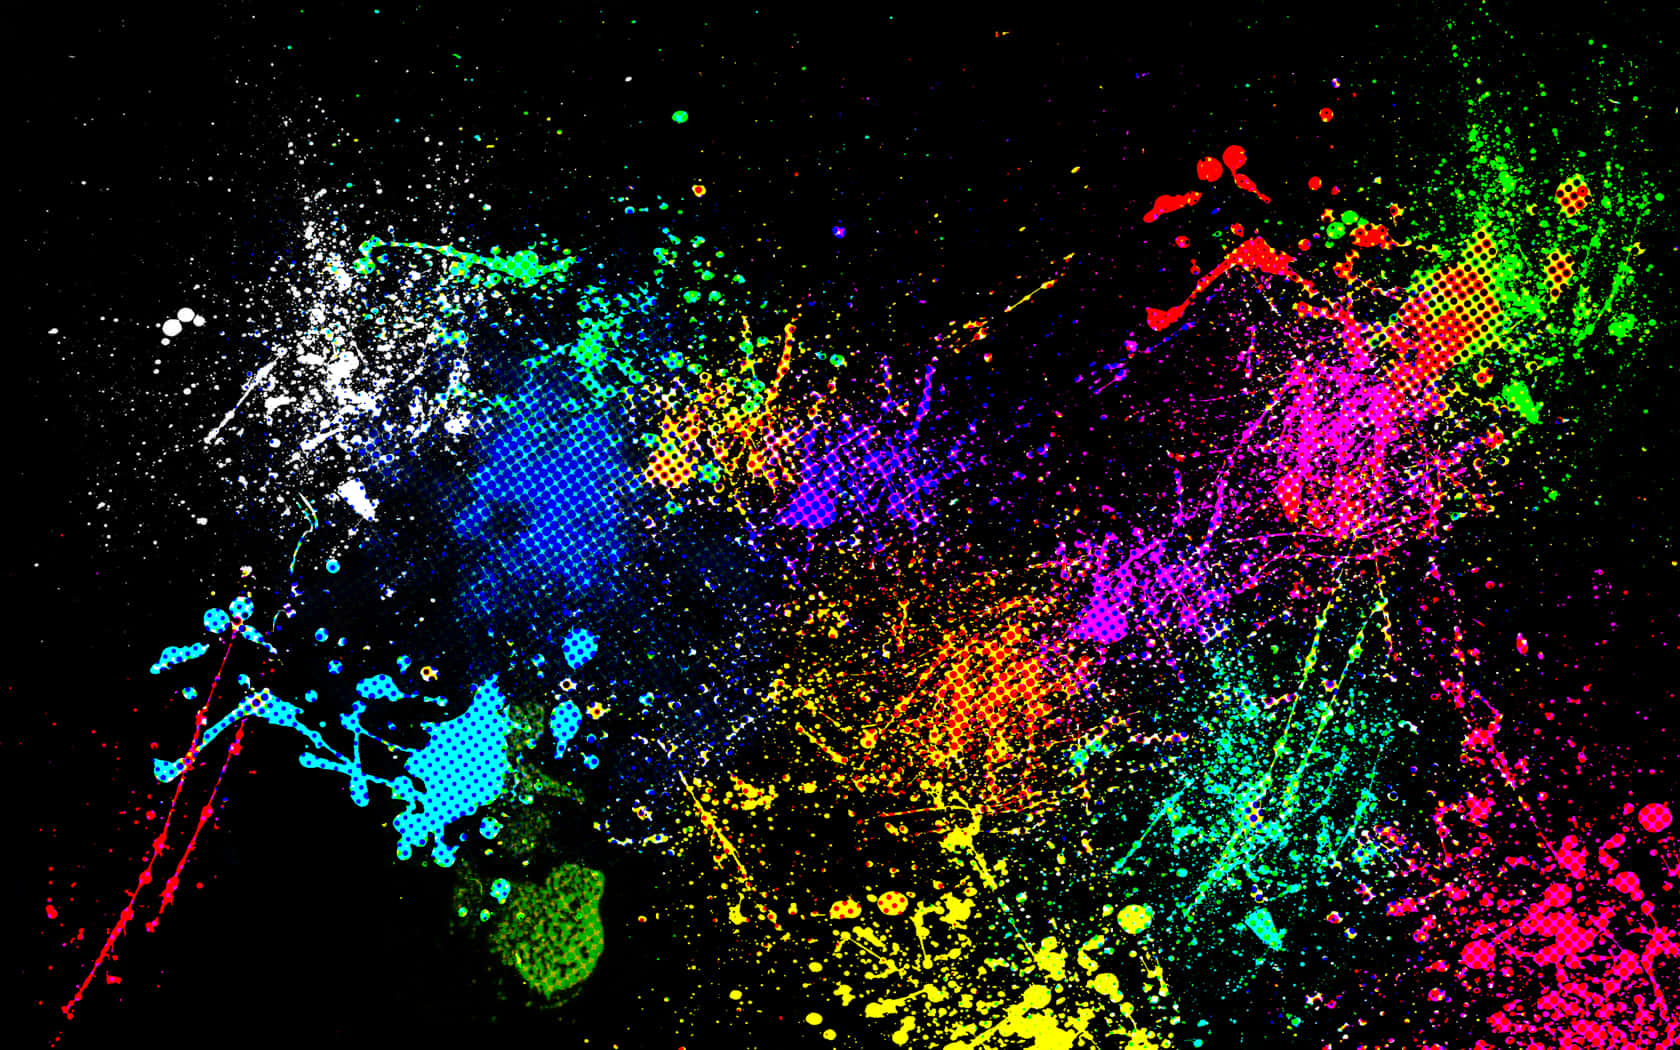 "A Colorful Paint Dripping Artistic Expression" Wallpaper